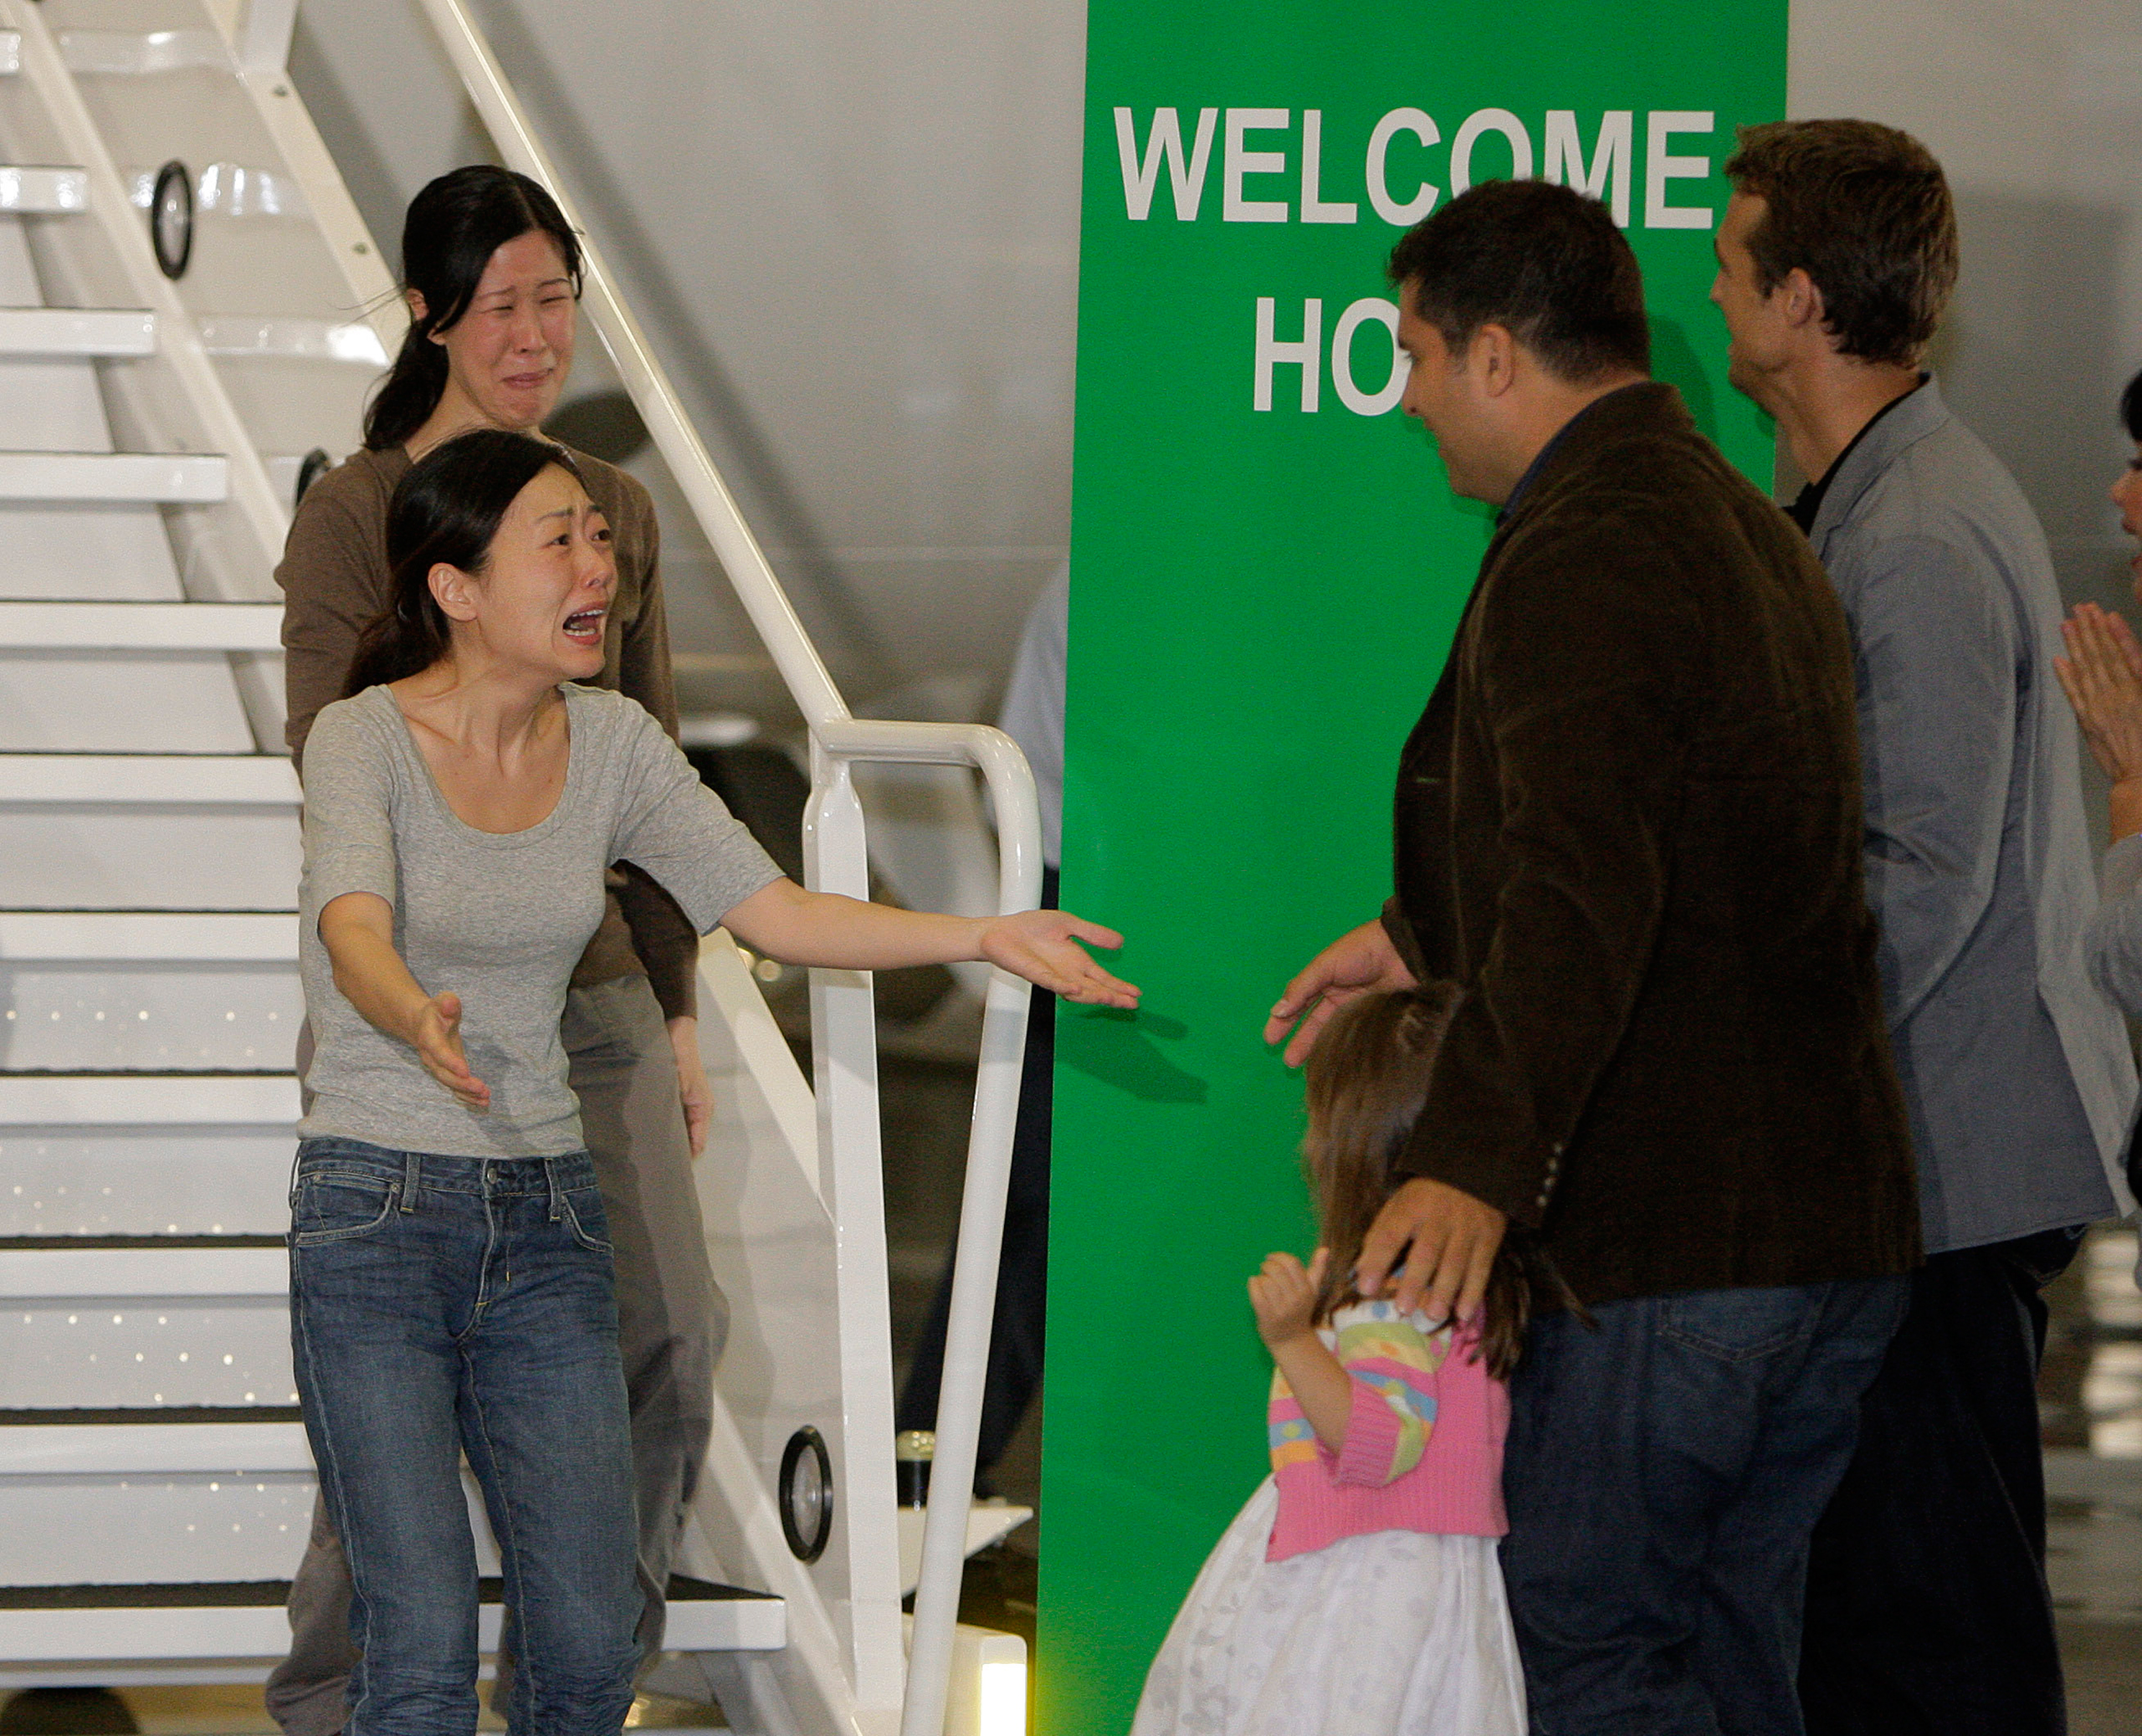 Euna Lee, left, and Laura Ling, are greeted by their husbands after their arrival at Bob Hope Airport in Burbank, Calif., on Aug. 5, 2009. The two American journalists had been arrested that March after allegedly crossing into North Korea from China. (Jae C. Hong—AP)